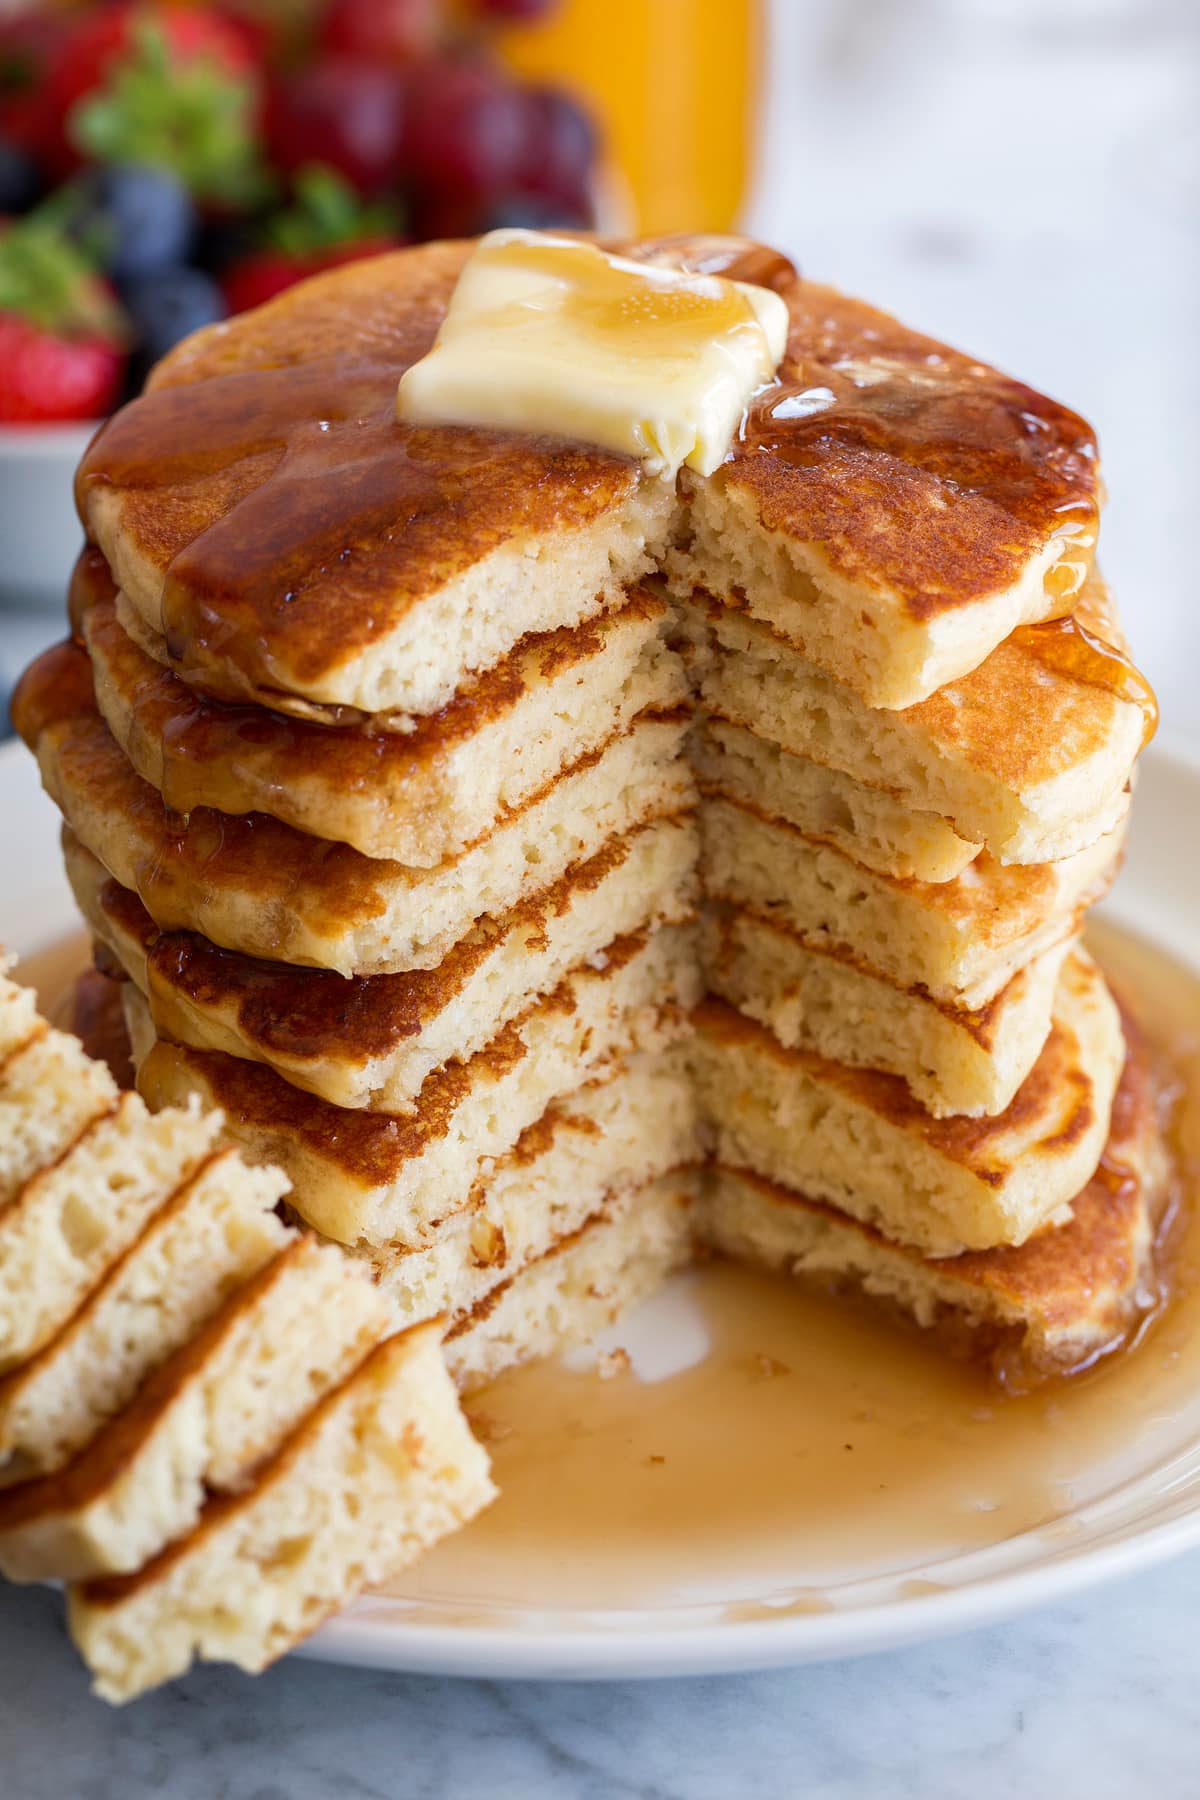 Stack of pancakes with one side cut to show interior.